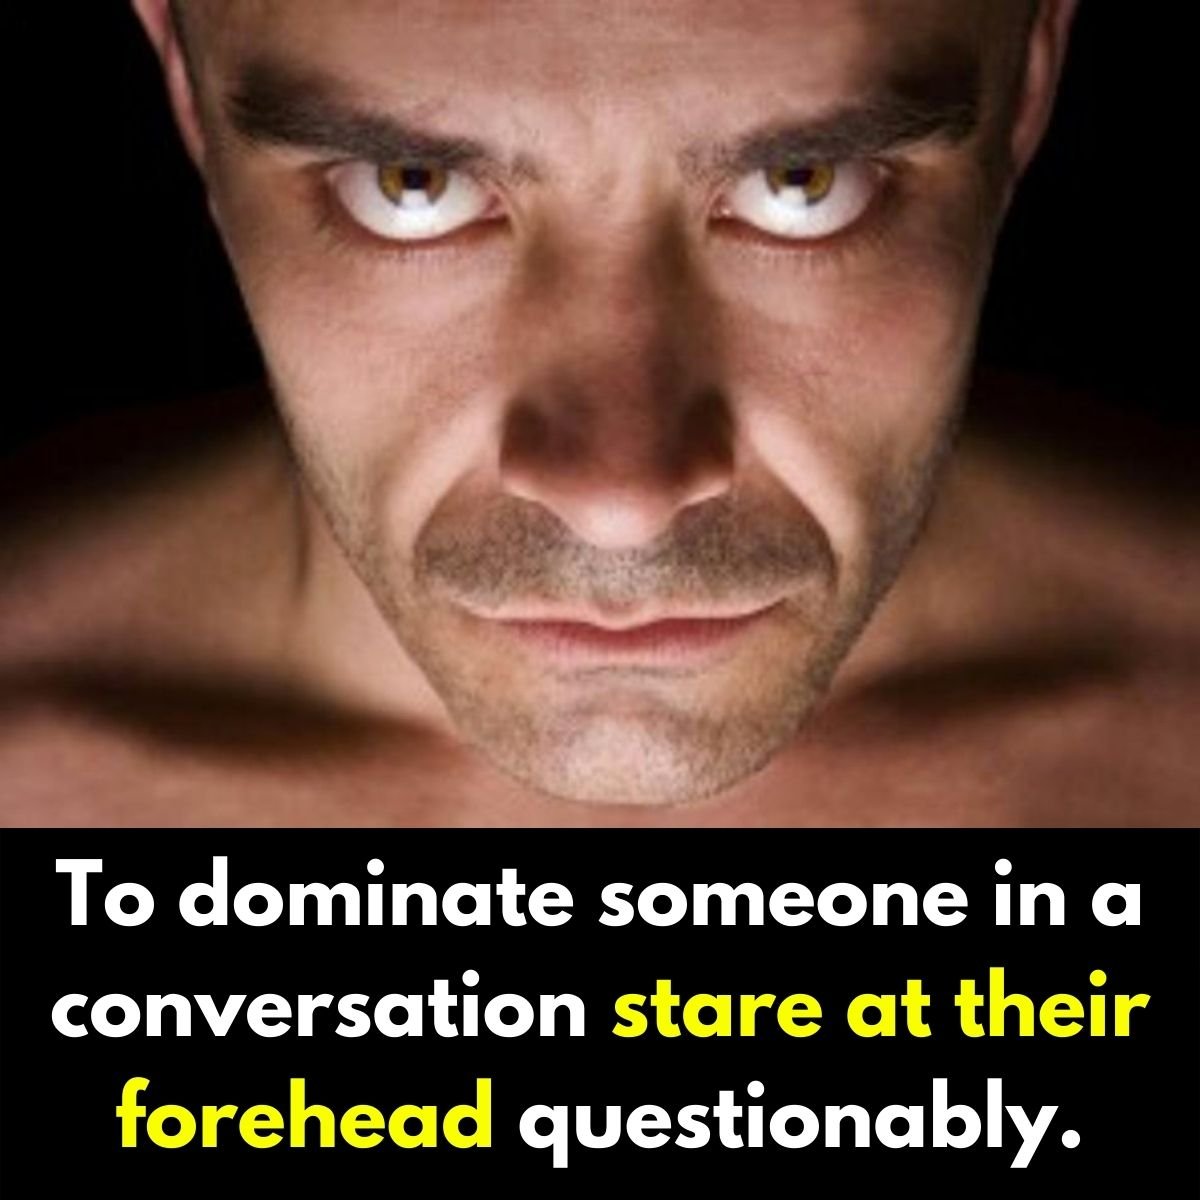 to dominate someone in a conversation, stare at their forehead questionably